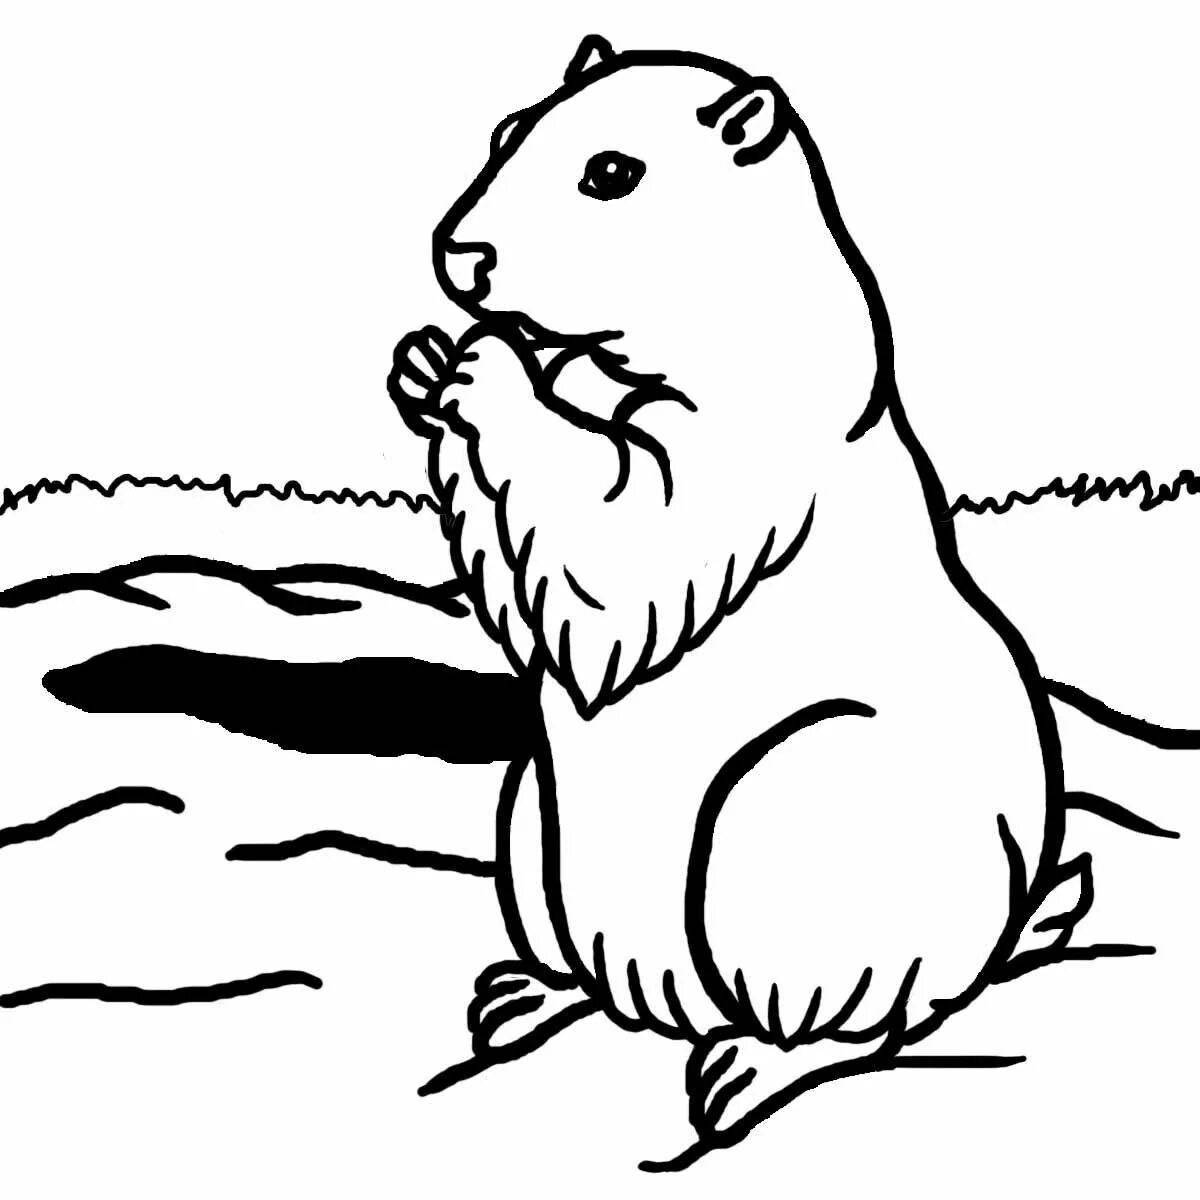 Unique gopher coloring page for kids